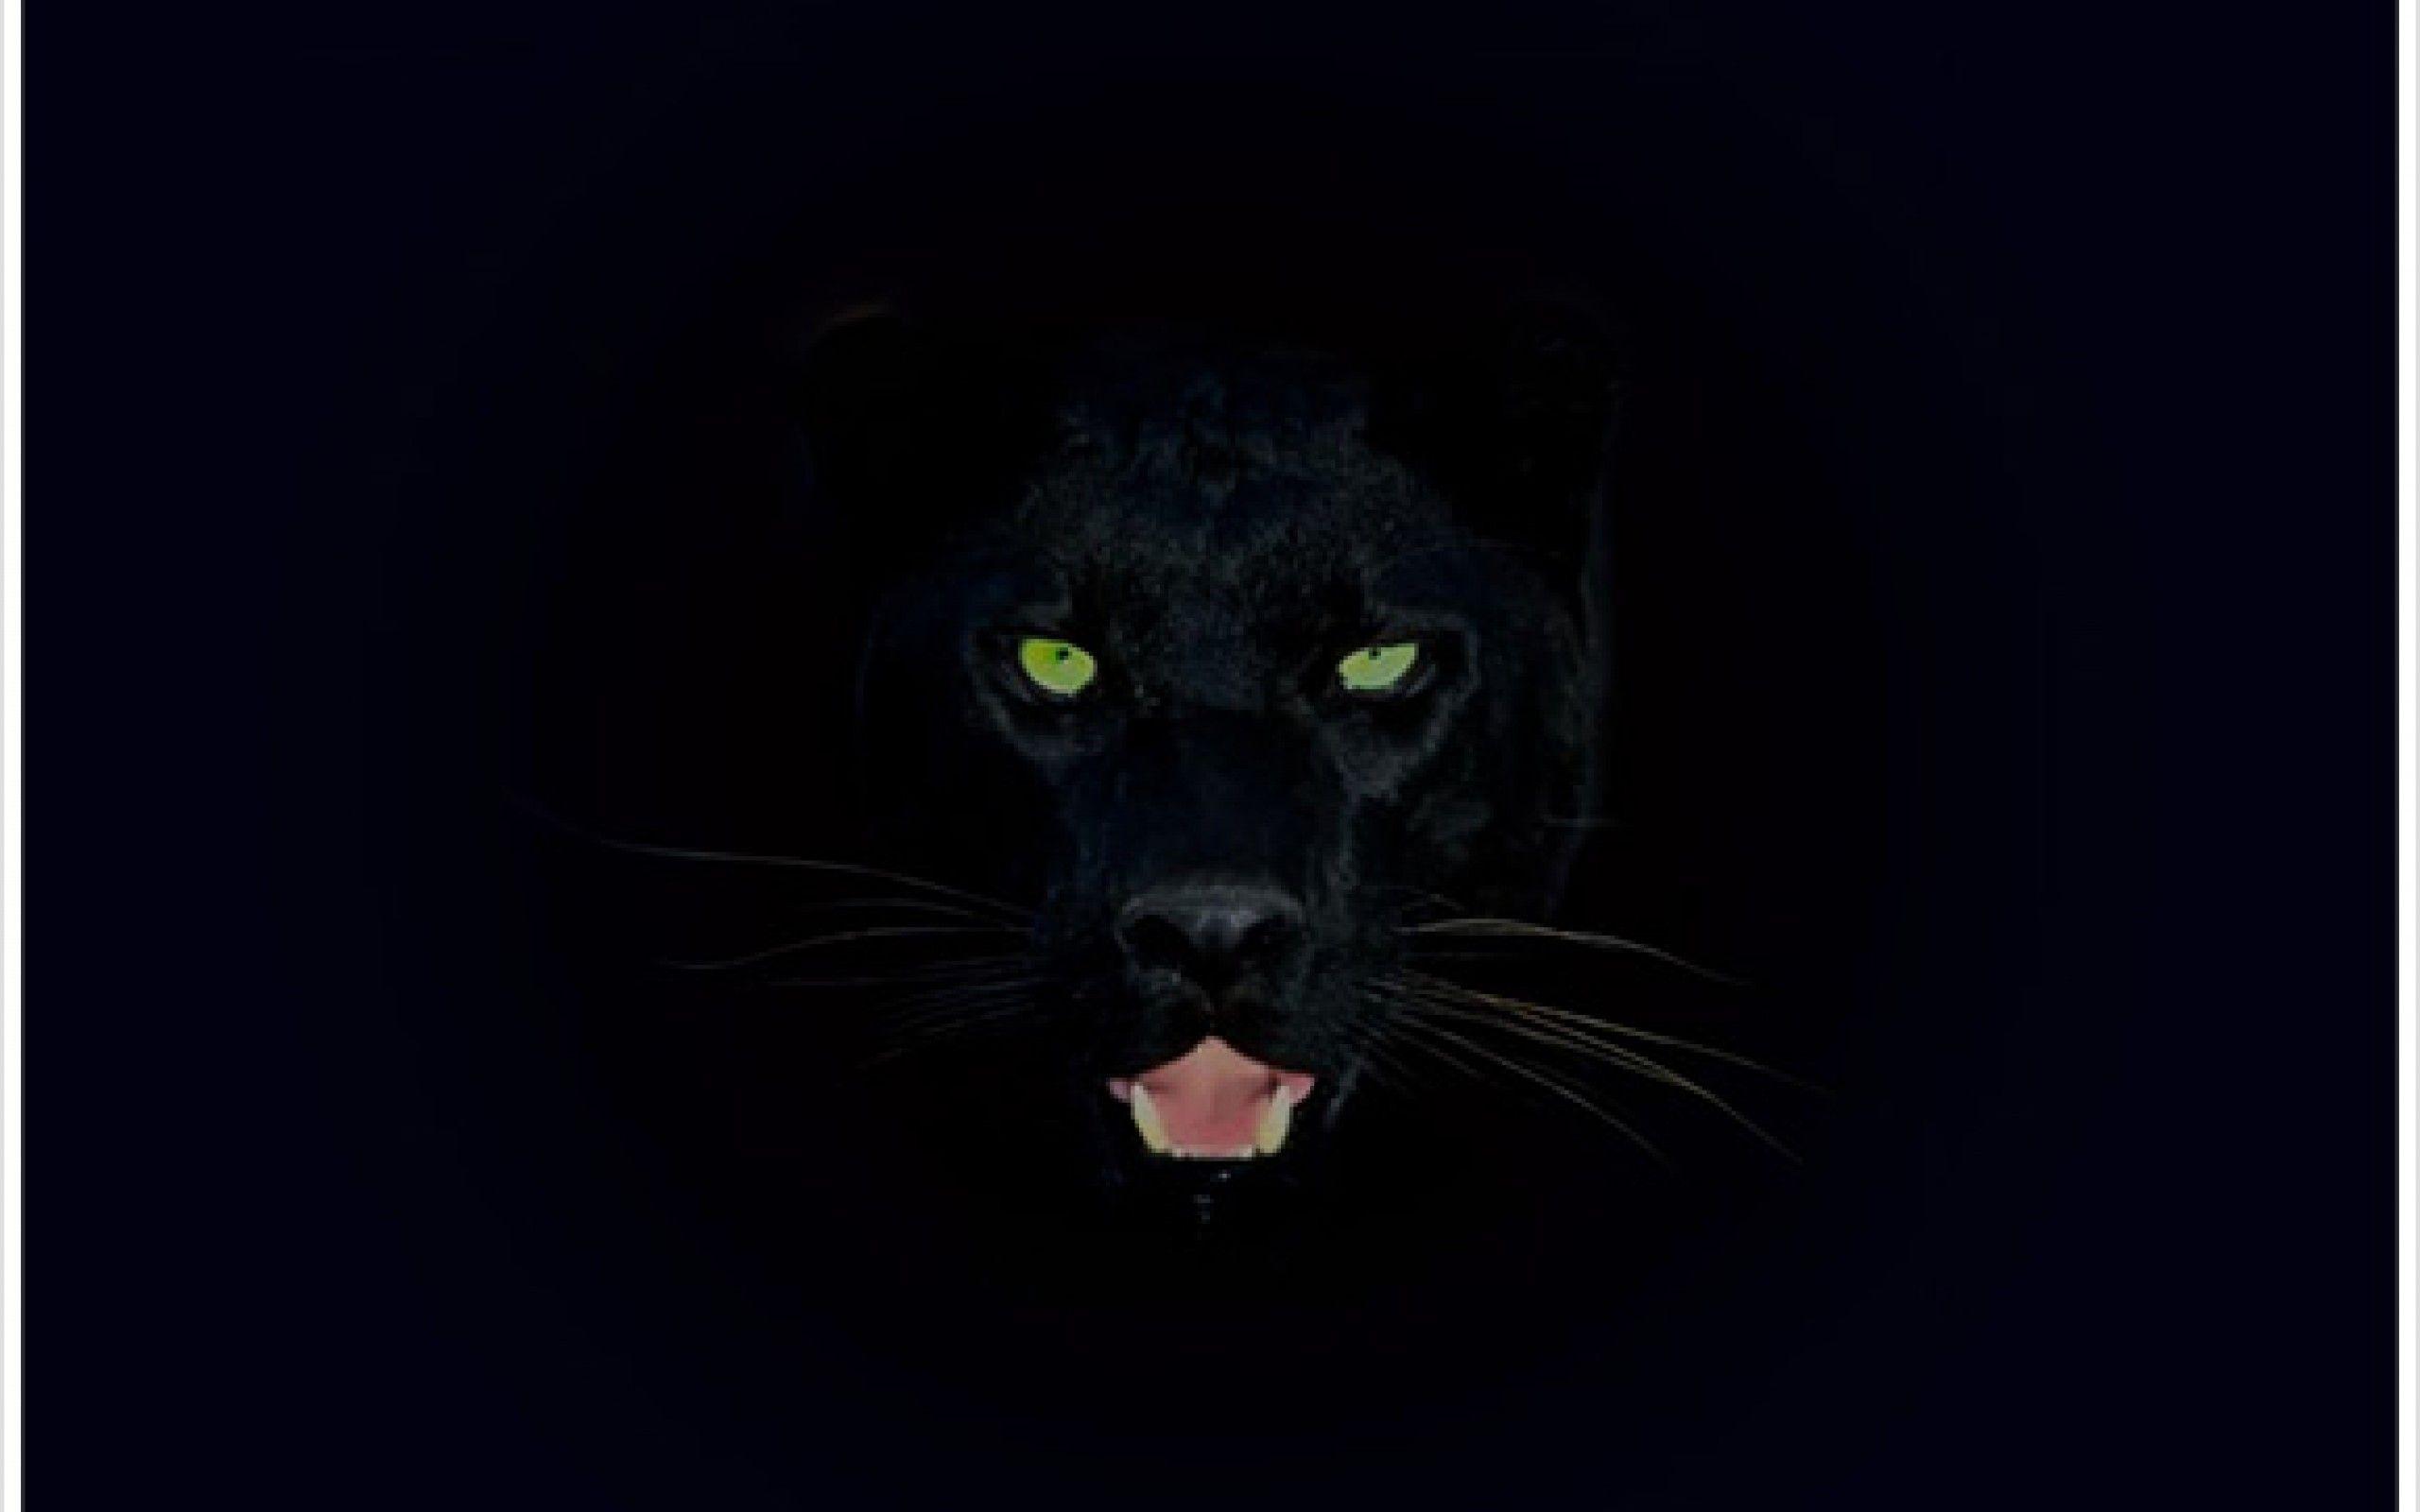 583952 1920x1080 panther animals wallpaper JPG 503 kB - Rare Gallery HD  Wallpapers